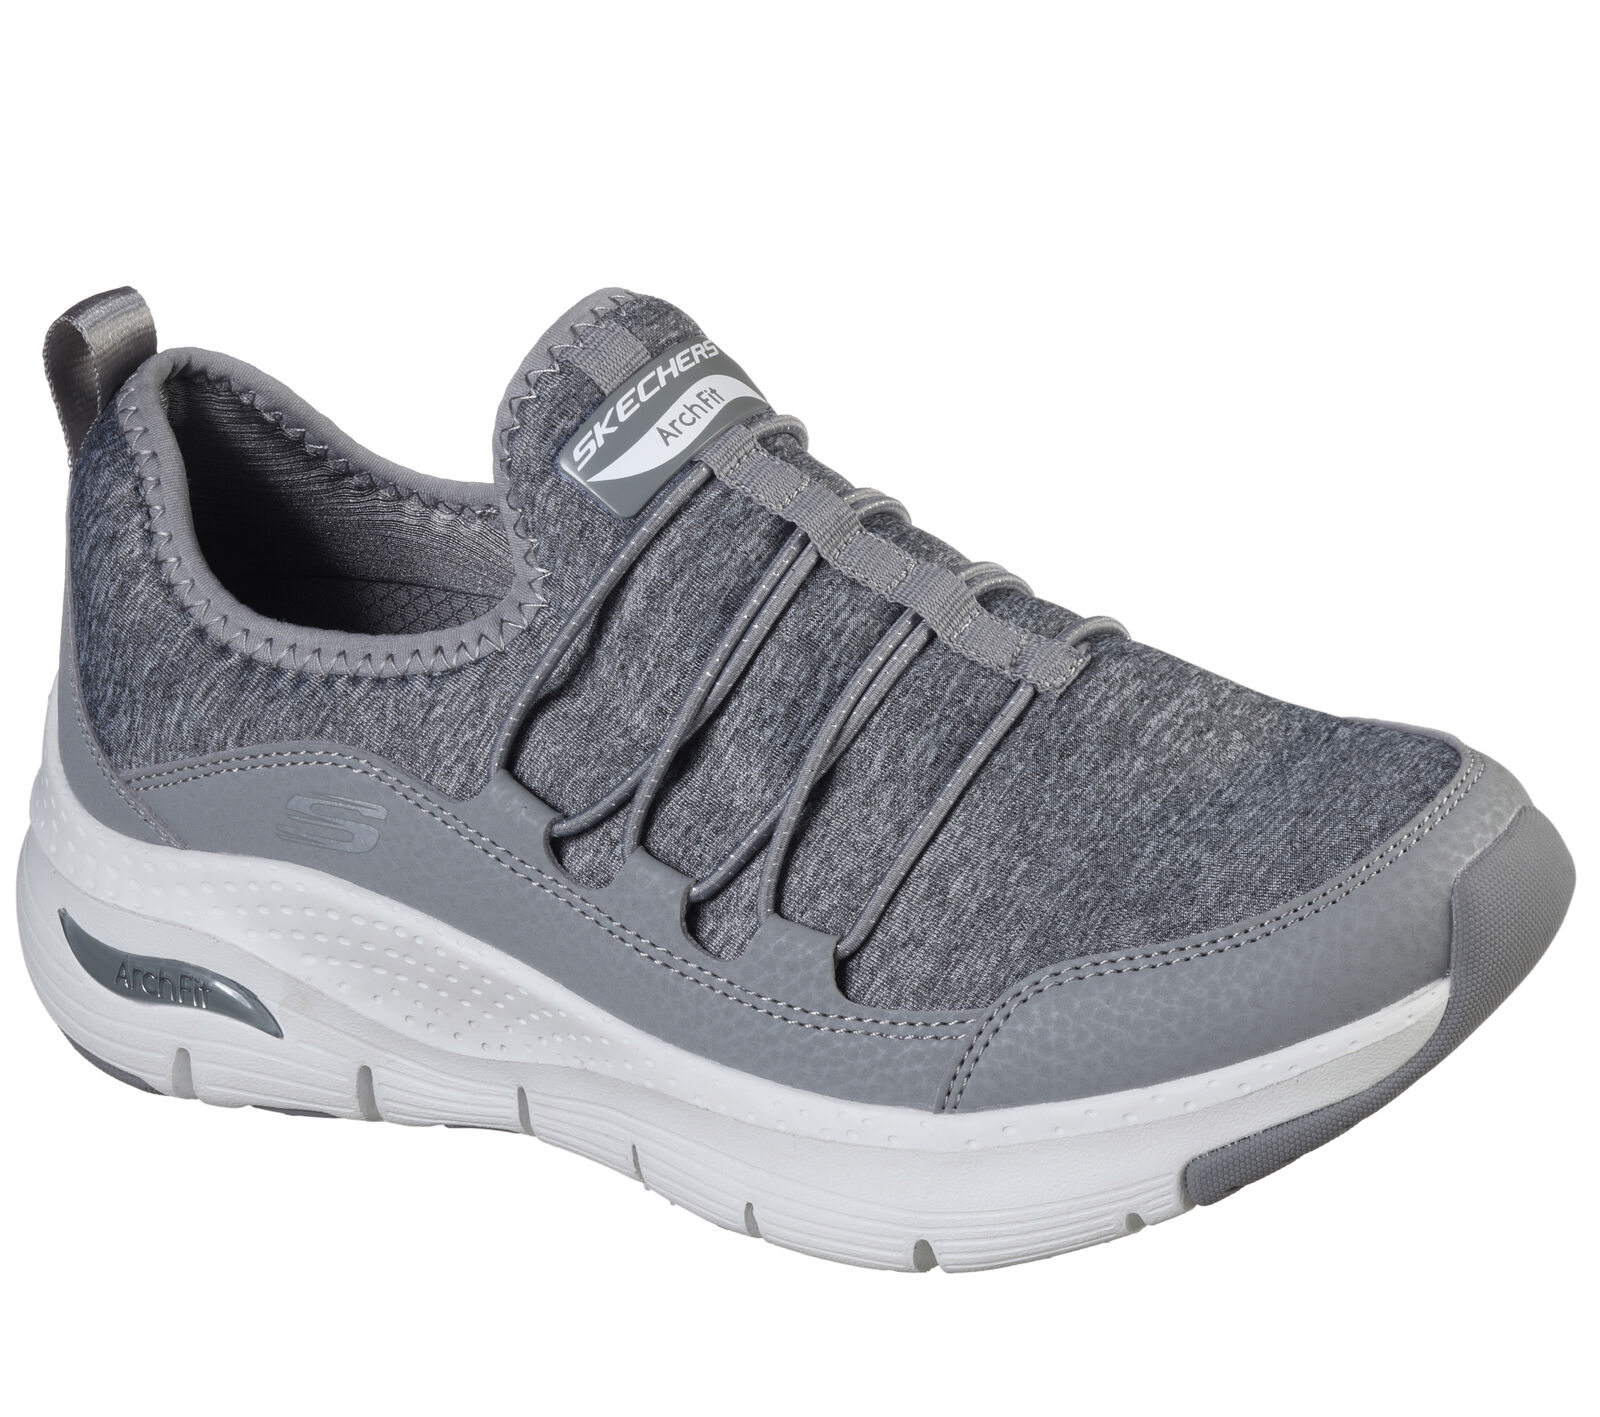 Shop the Skechers Arch Fit - Rainbow View | SKECHERS